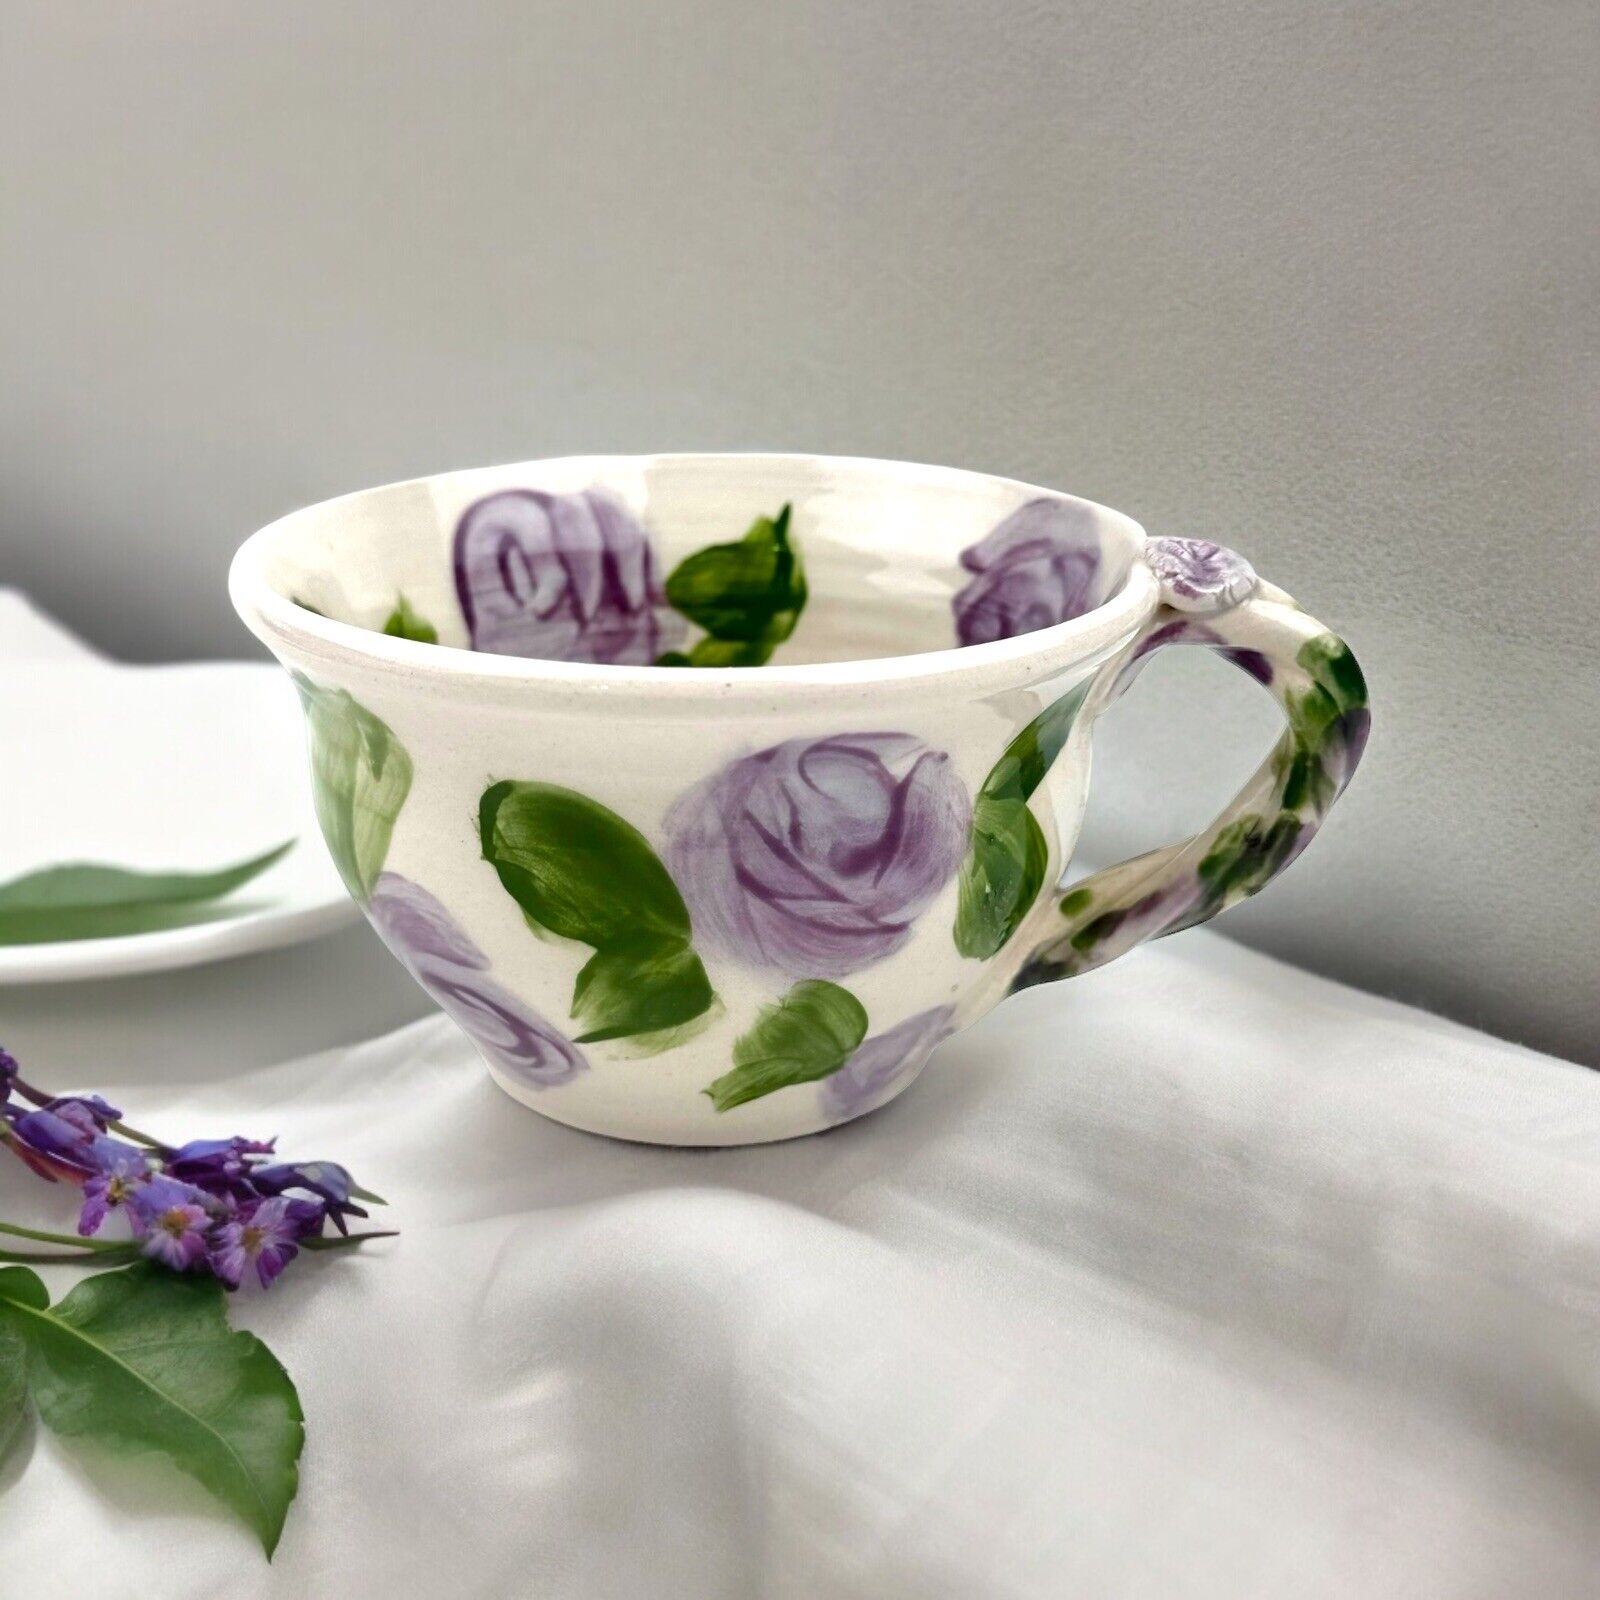 Anthropologie Style Floral Hand Painted Ceramic Coffee Mug Purple Roses Signed